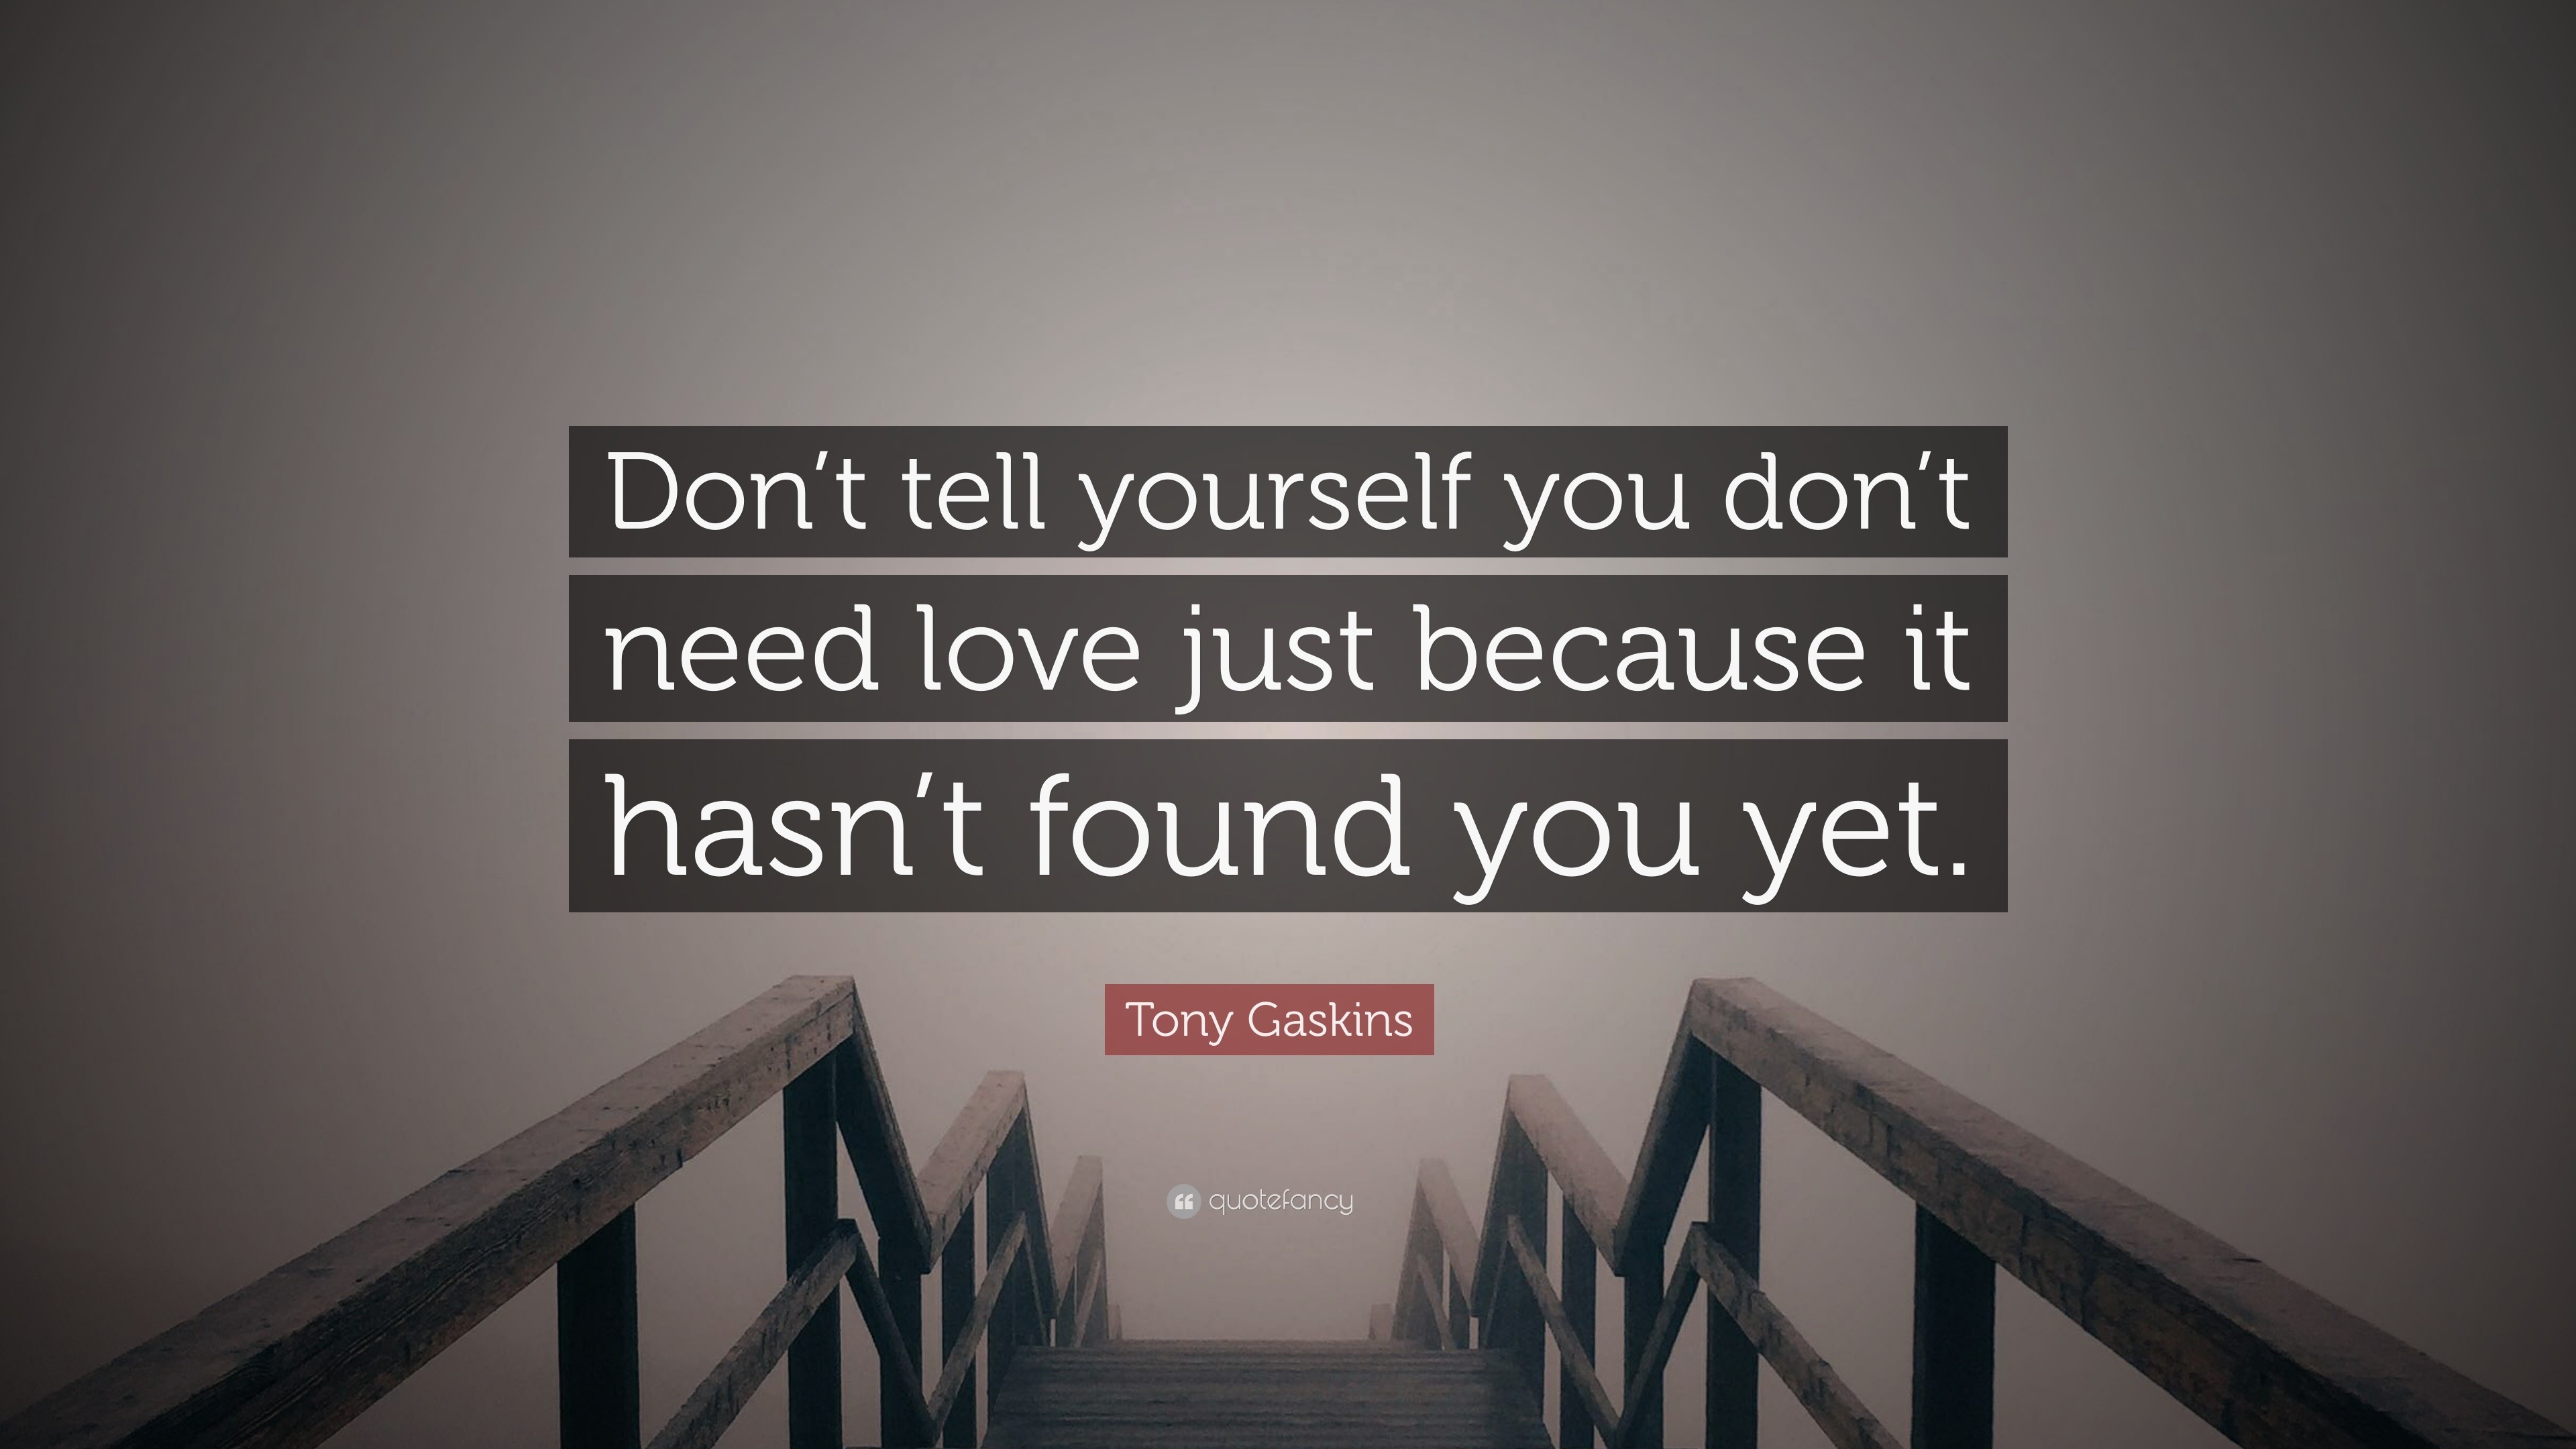 Tony Gaskins Quote “Don t tell yourself you don t need love